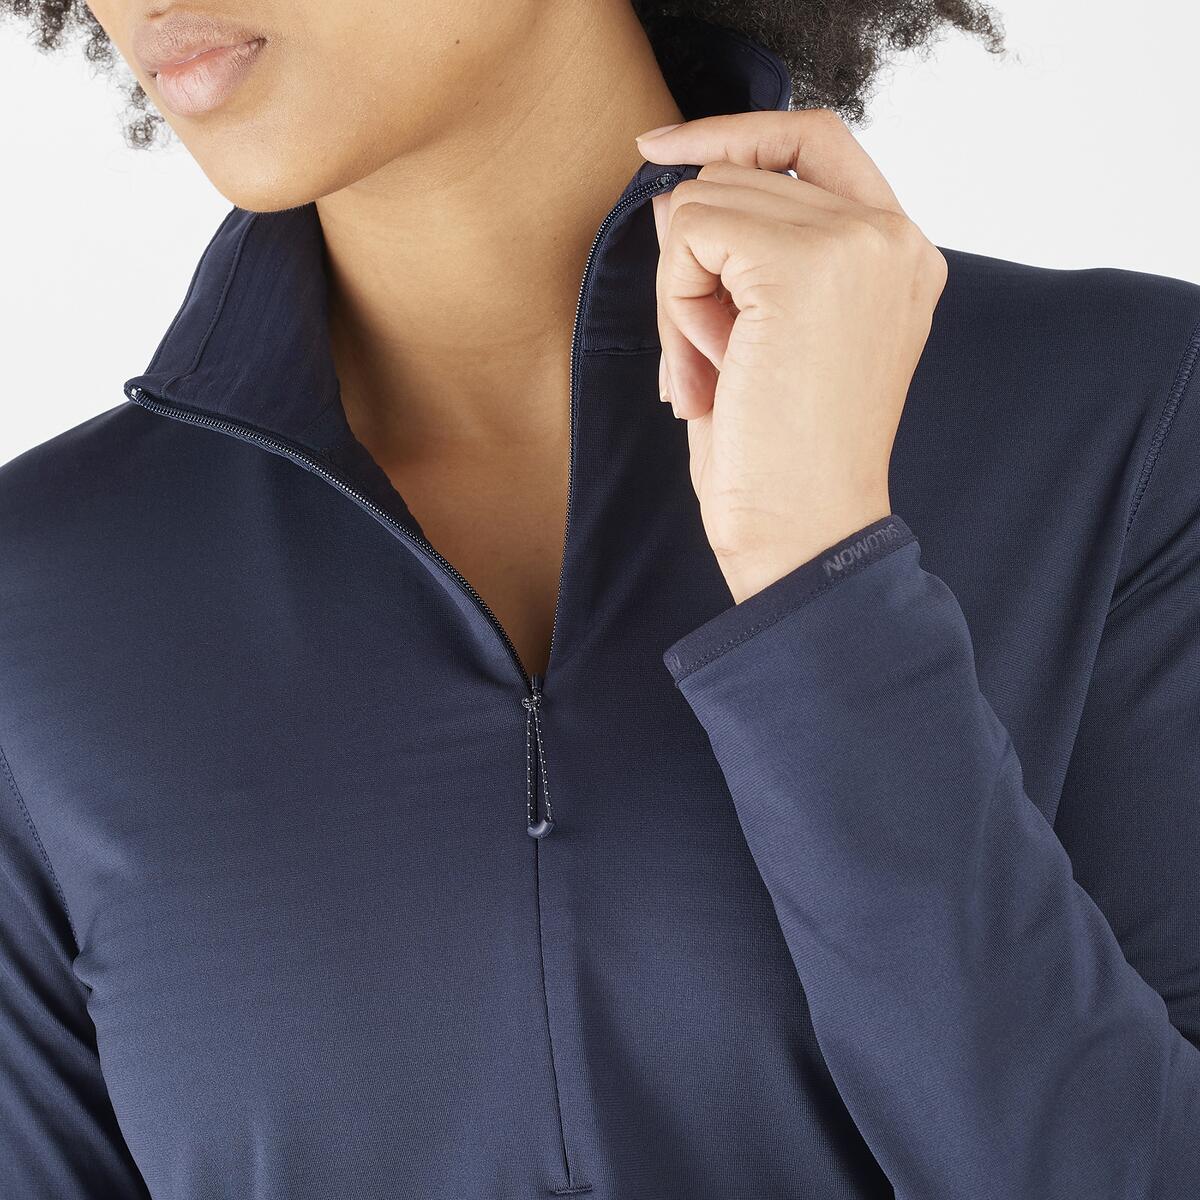 OUTRACK HALF ZIP MID